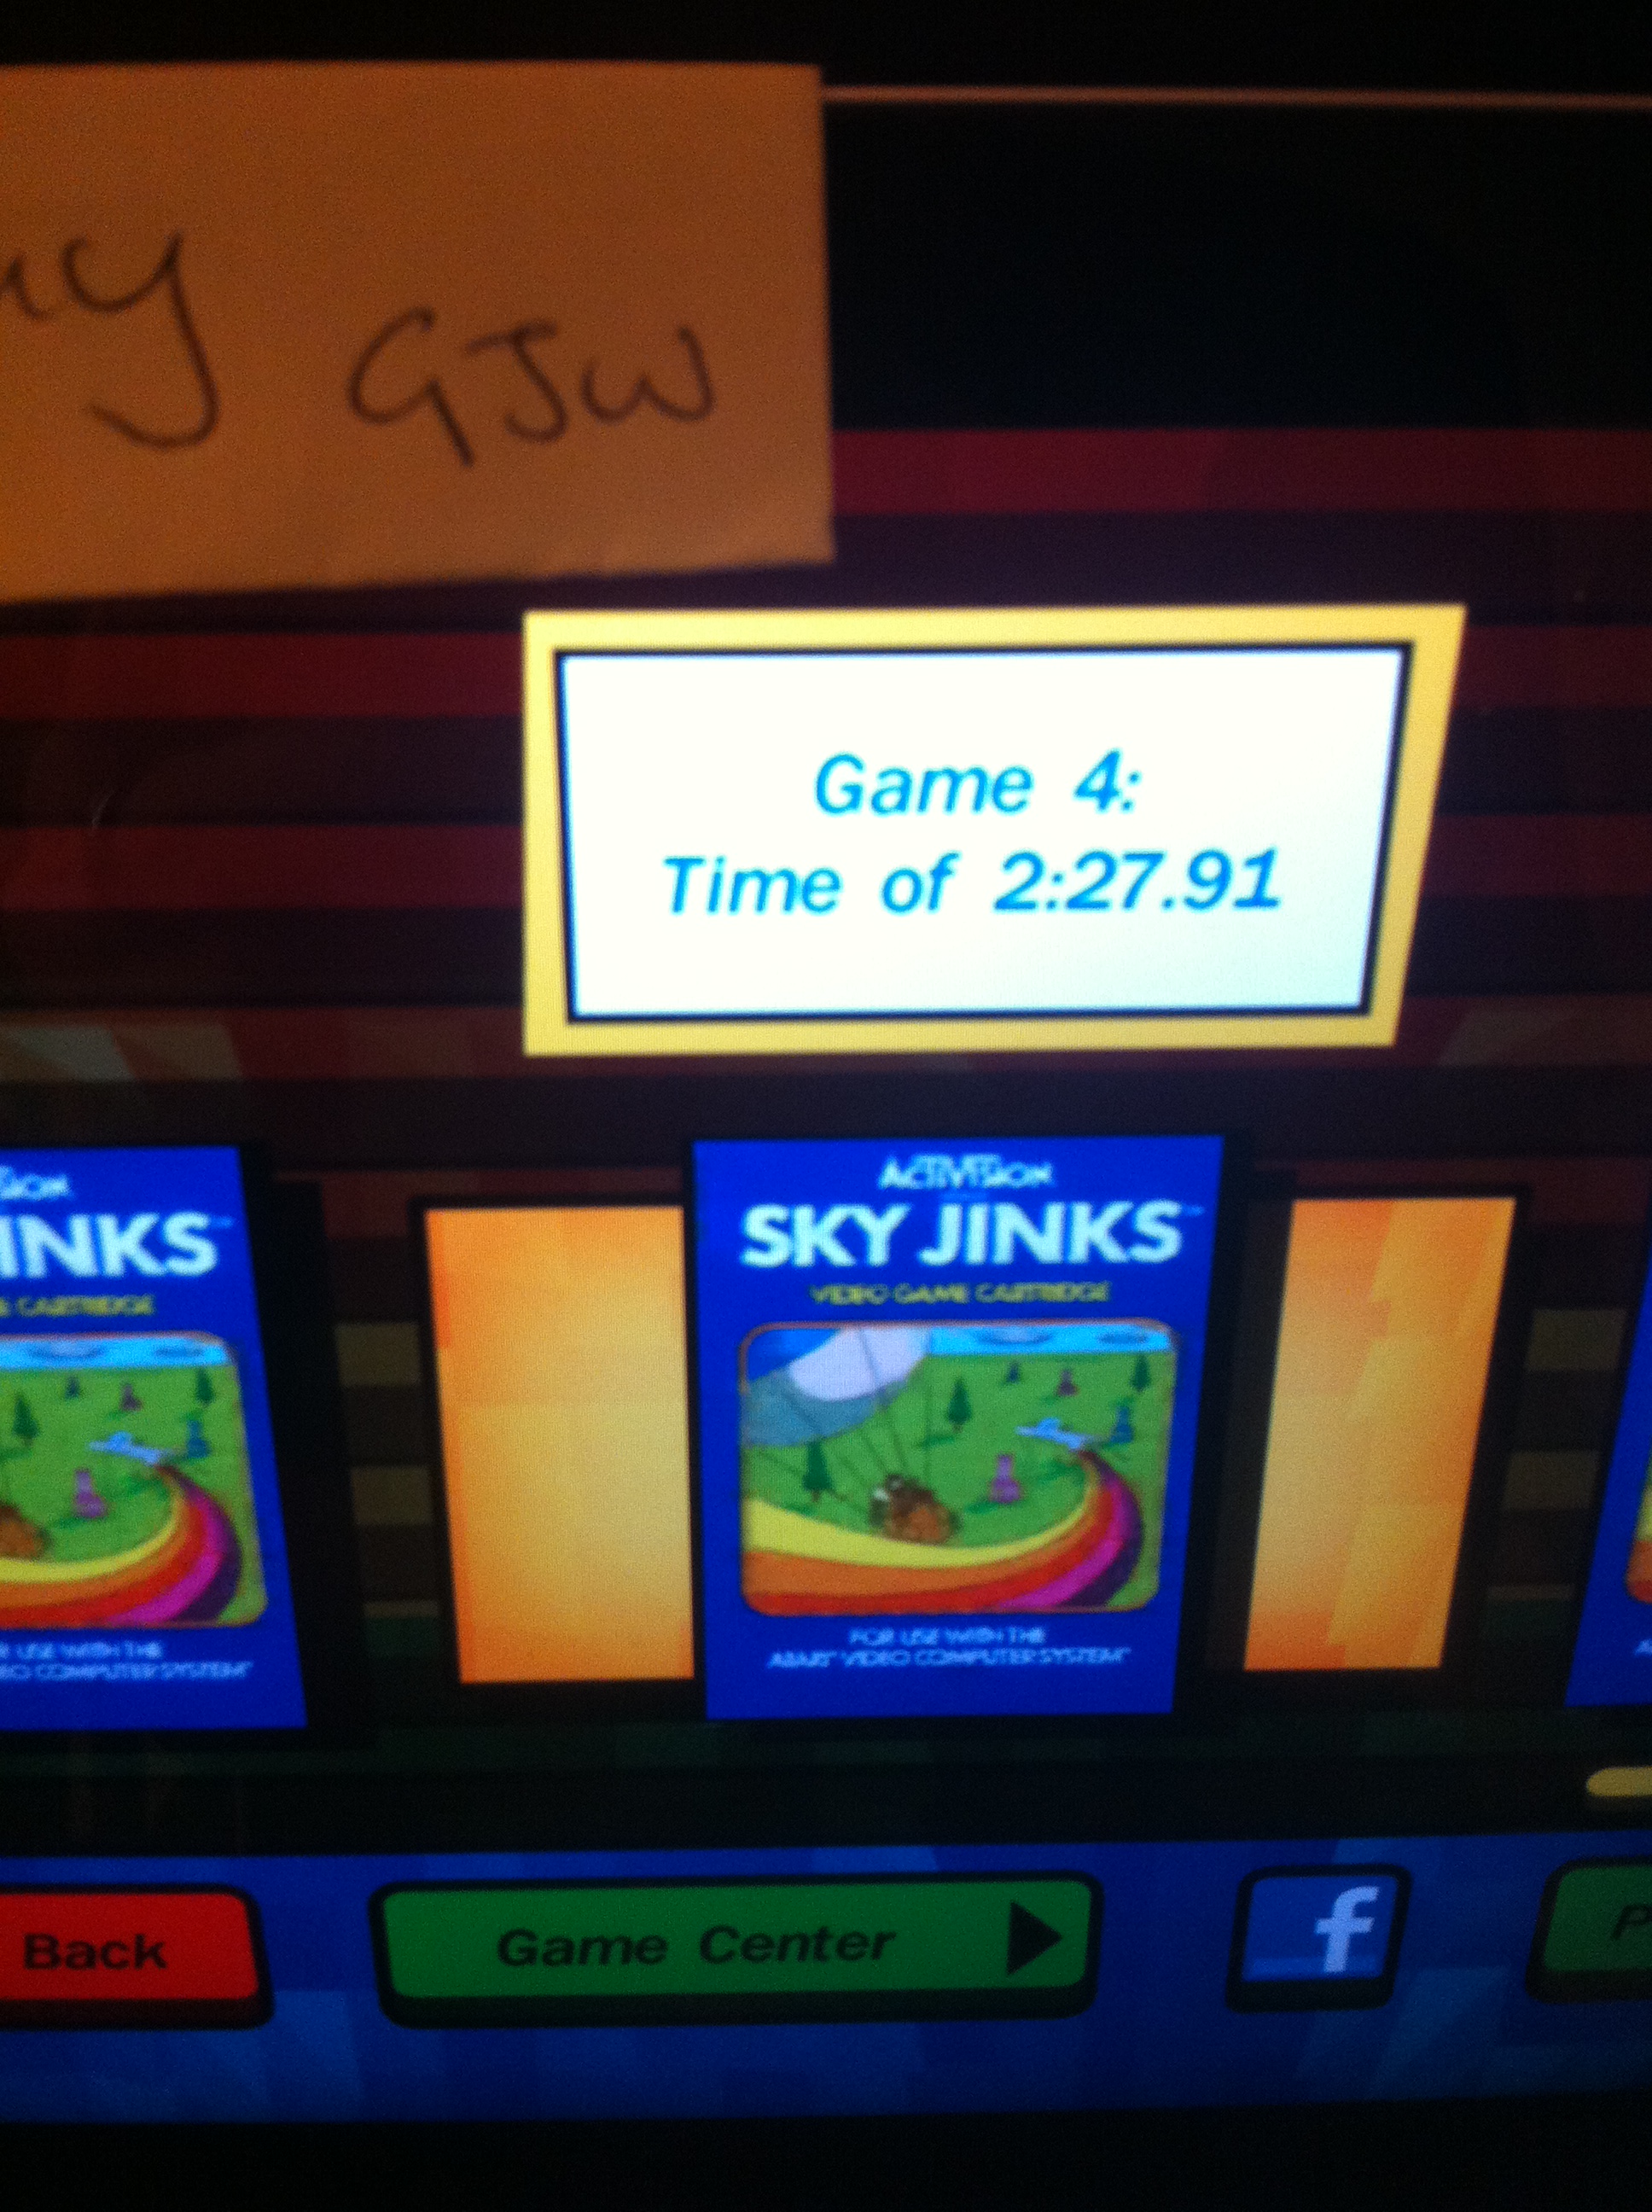 Activision Anthology: Sky Jinks [Game 4B] time of 0:02:27.91